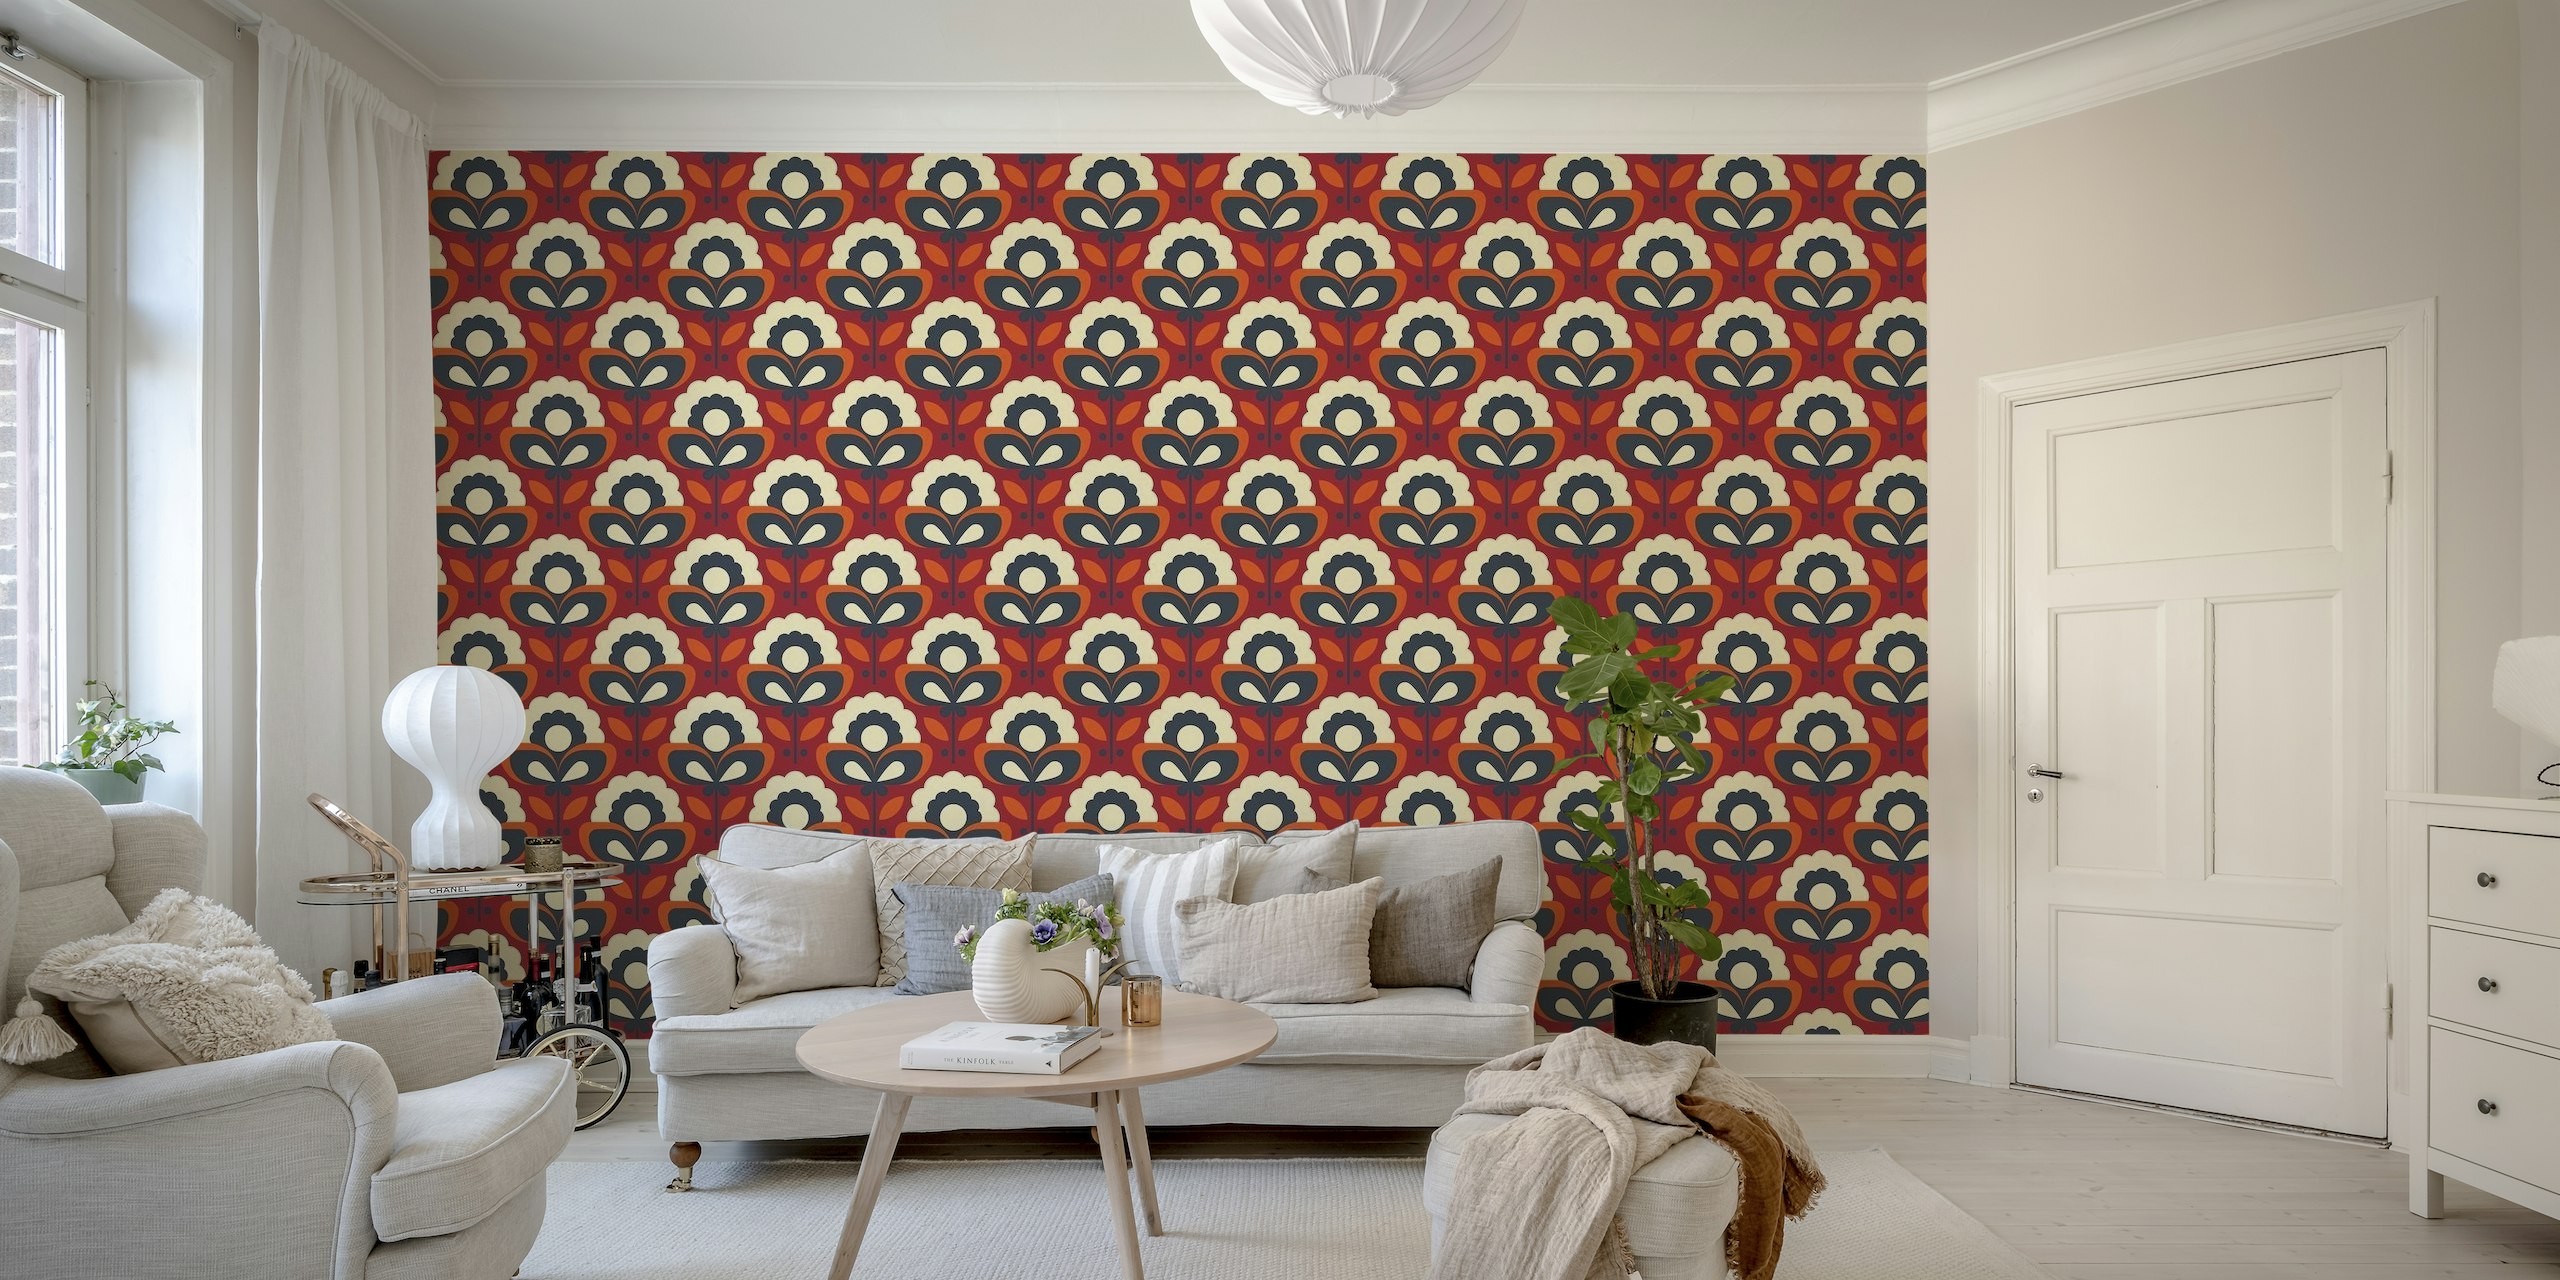 2709 A - retro flowers, red wallpaper